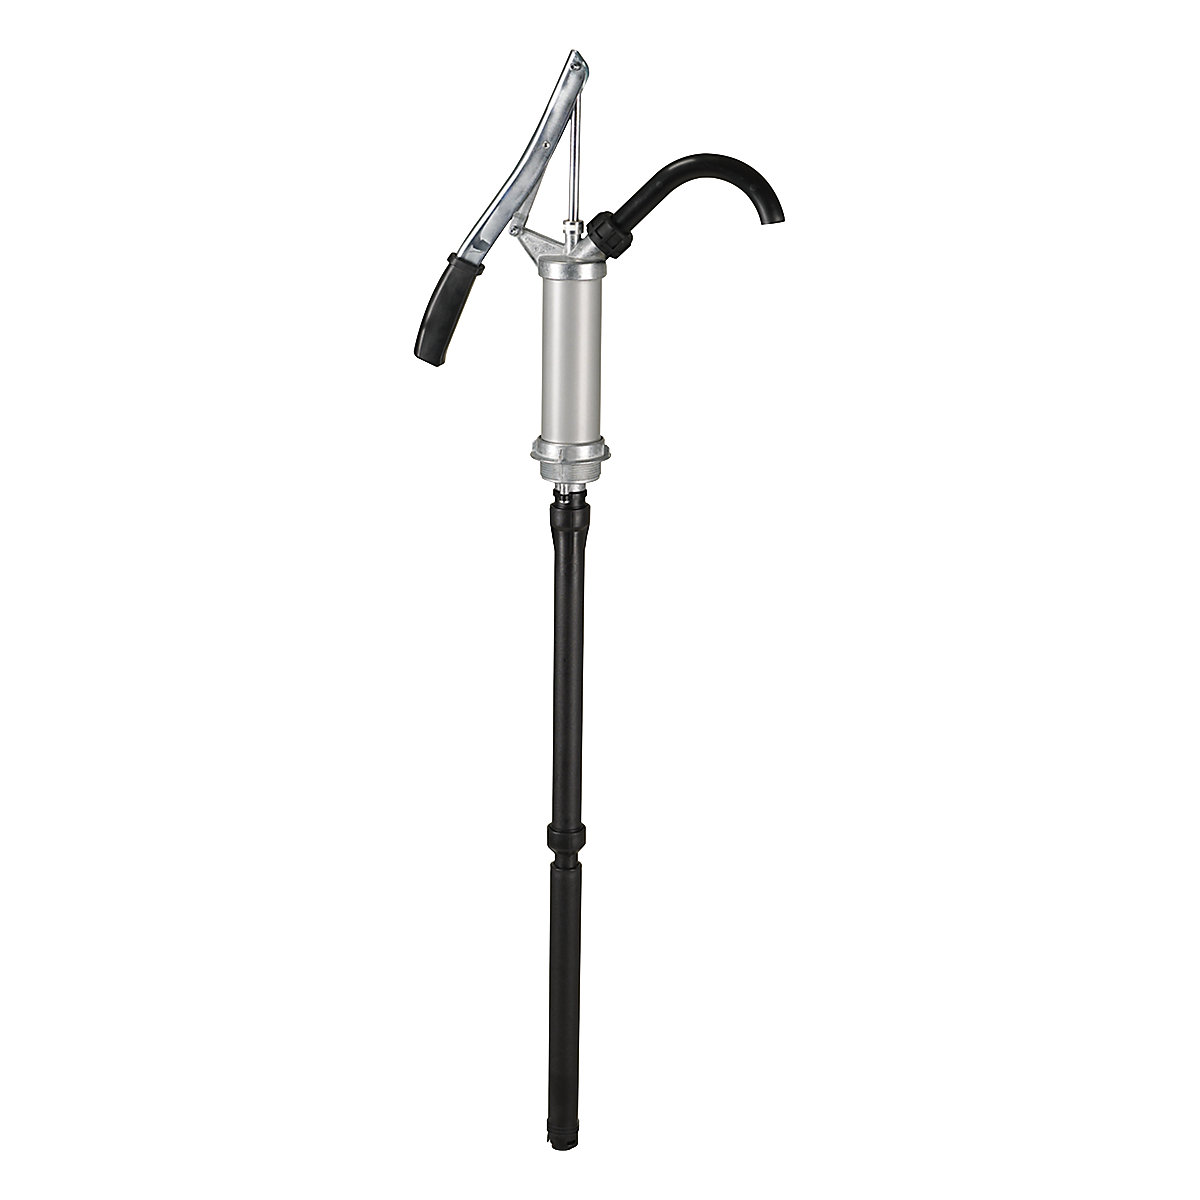 Lever operated cylinder-type manual pump - PRESSOL